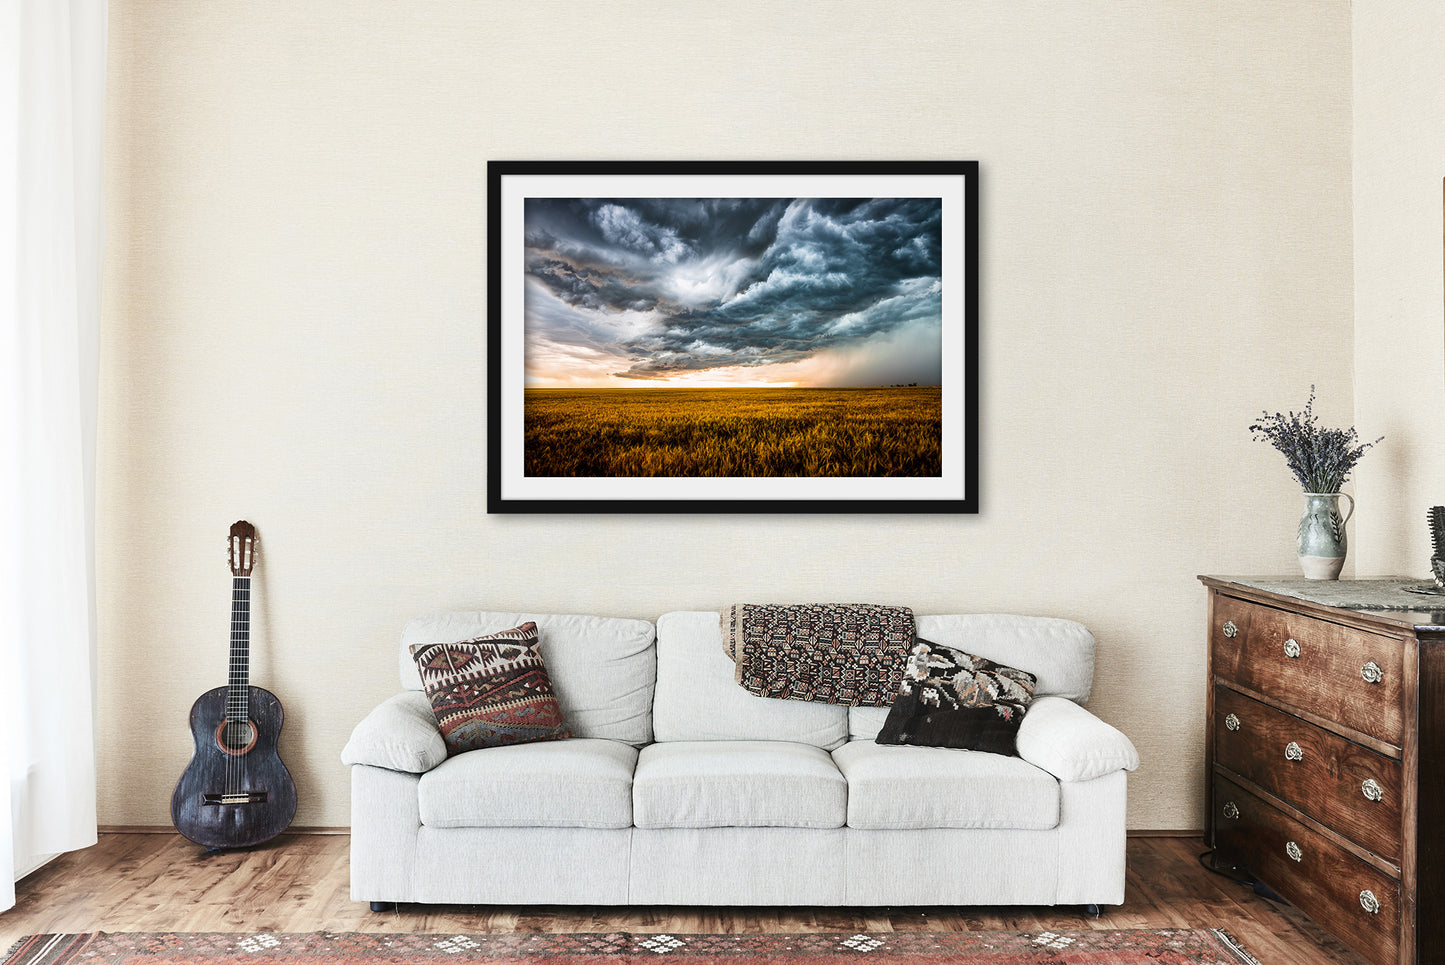 Framed and Matted Print of Storm Clouds Churning Over Golden Wheat Field in Colorado - Western Wall Art Photo Artwork Photography Decor